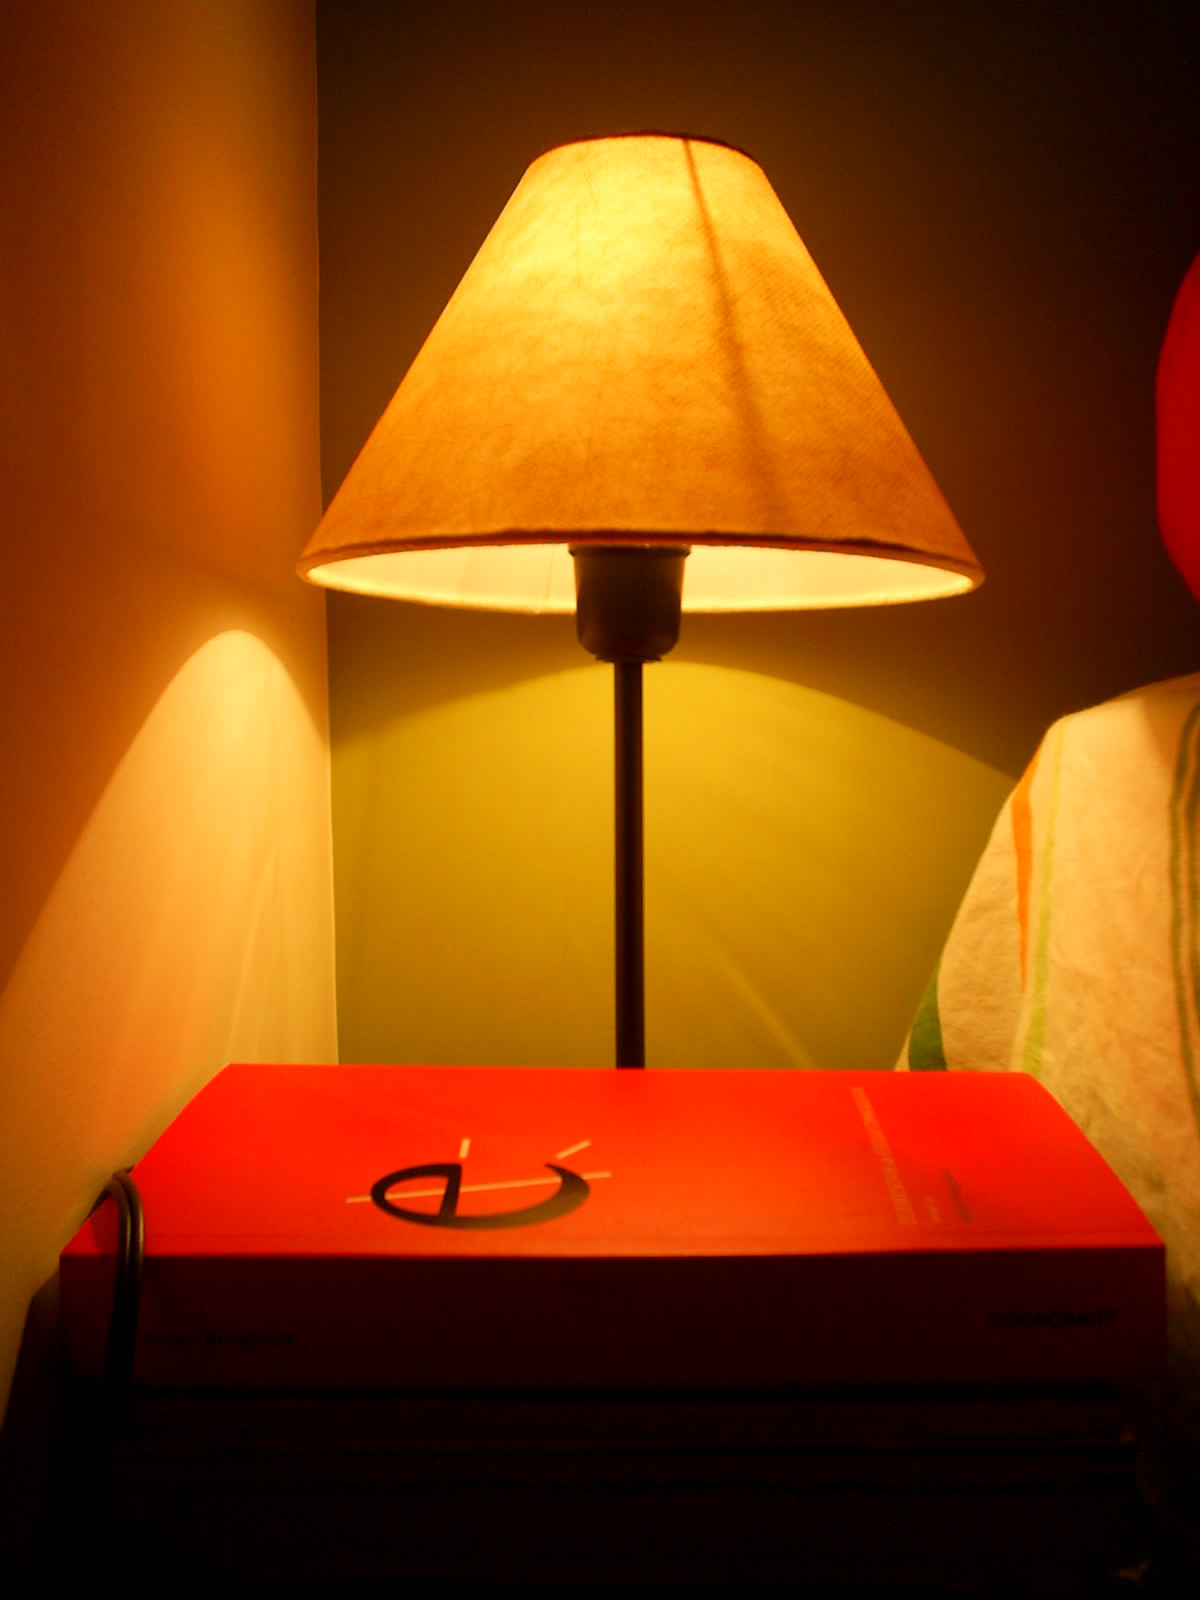 the lamp is lit over the red book on the nightstand